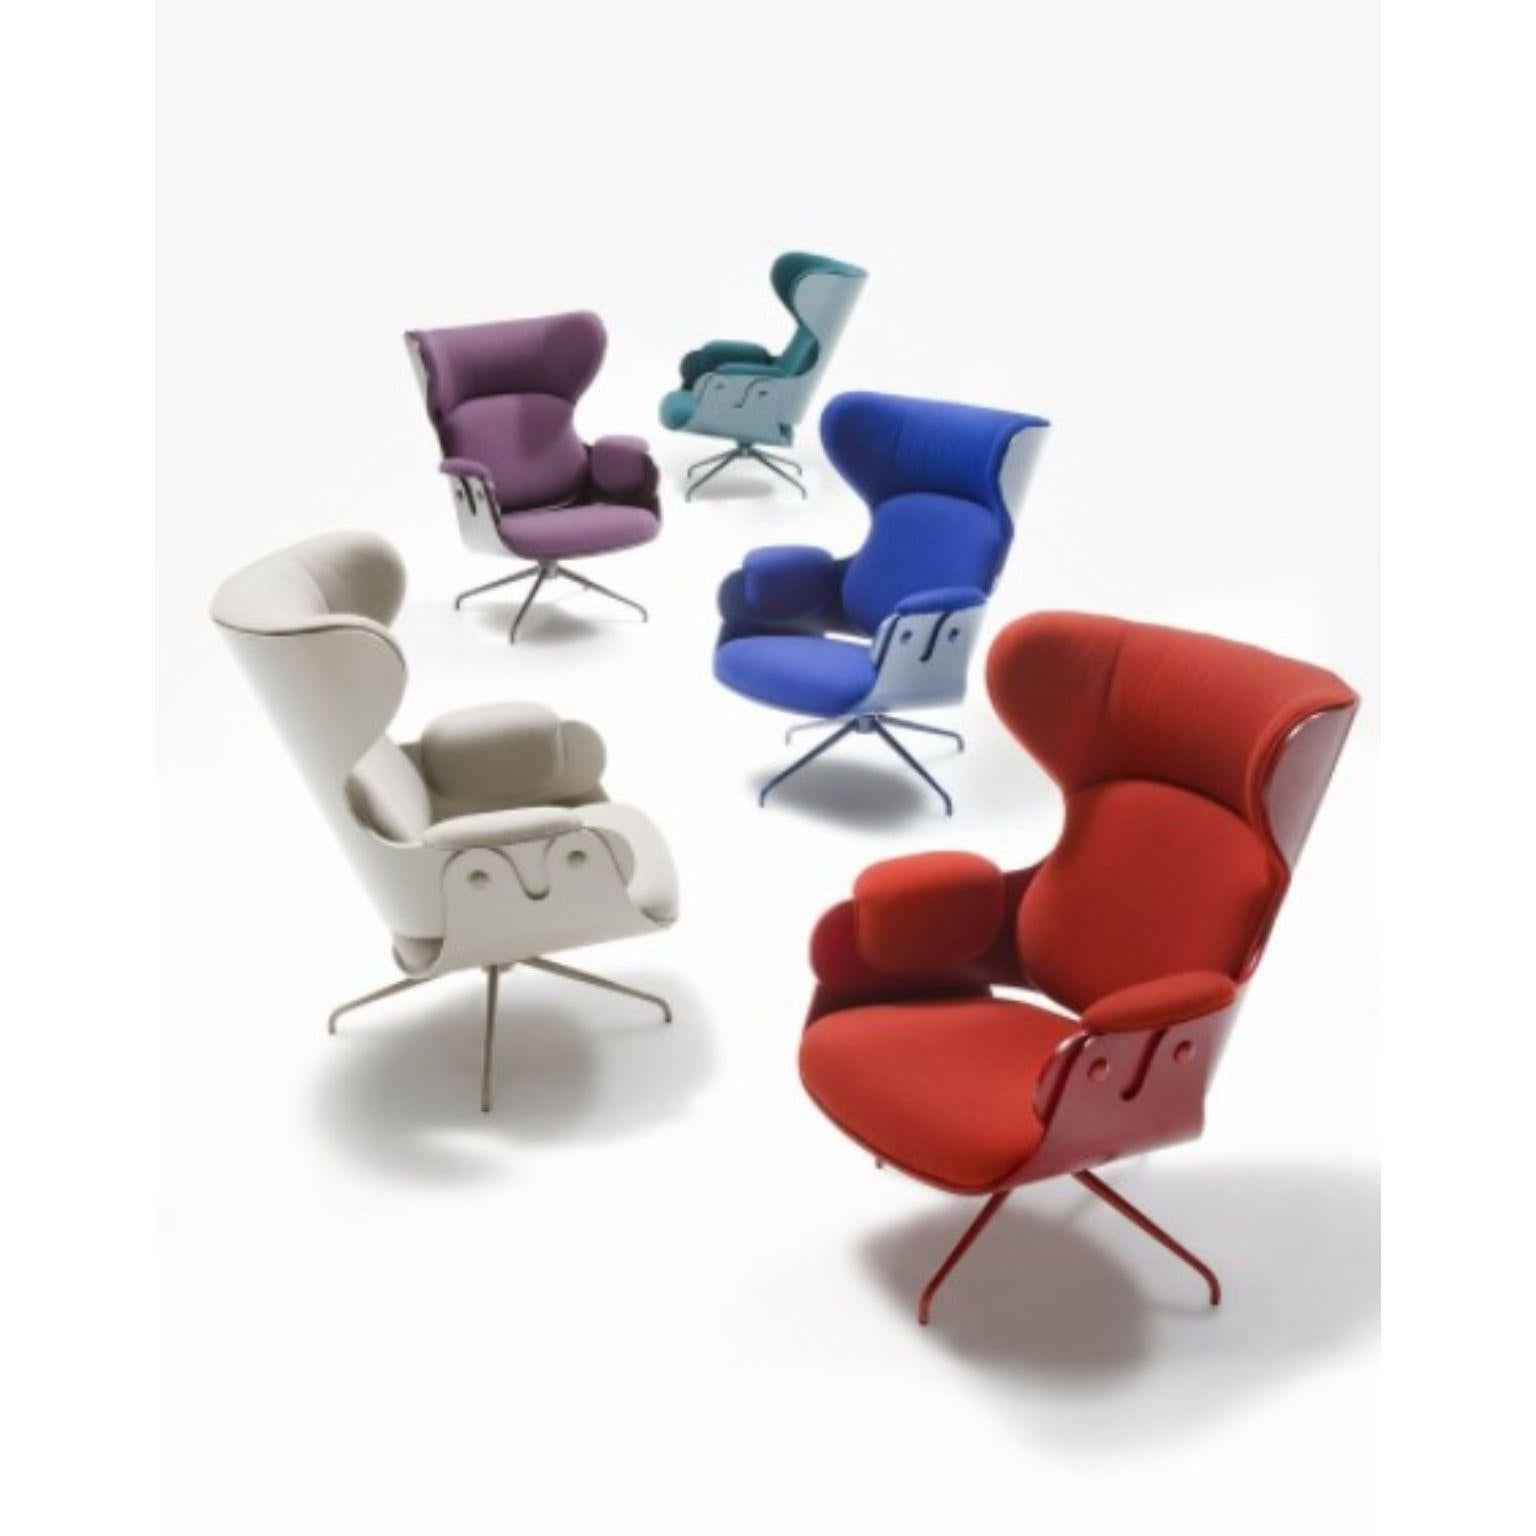 Set of 5 lounger armchair by Jaime Hayon 
Dimensions: D 91 x W 76 x H 99 cm 
Materials: armchair with a cast aluminum base structure and footstool with tubular steel legs and painted. Seat, backrest, and footstool in plywood and veneered in